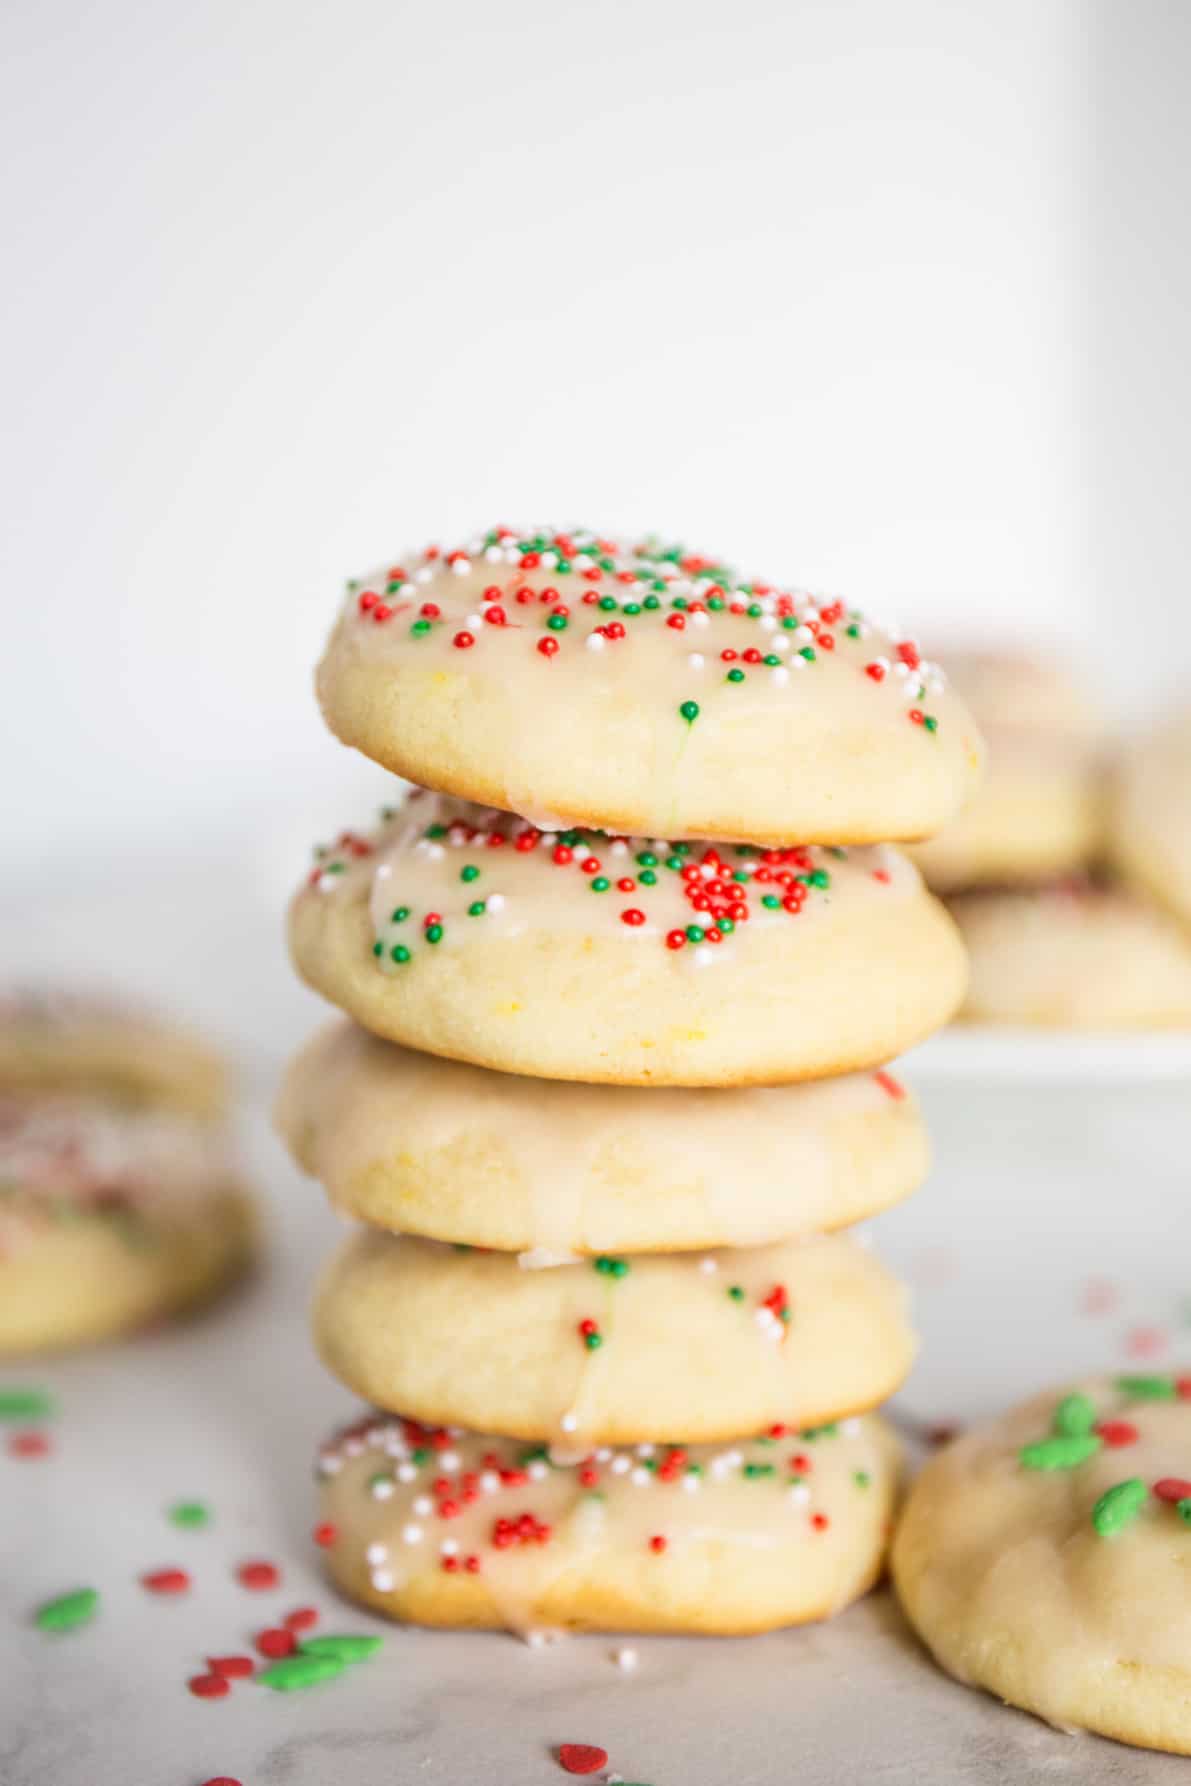 Italian ricotta cookies in a stack on a white surface.